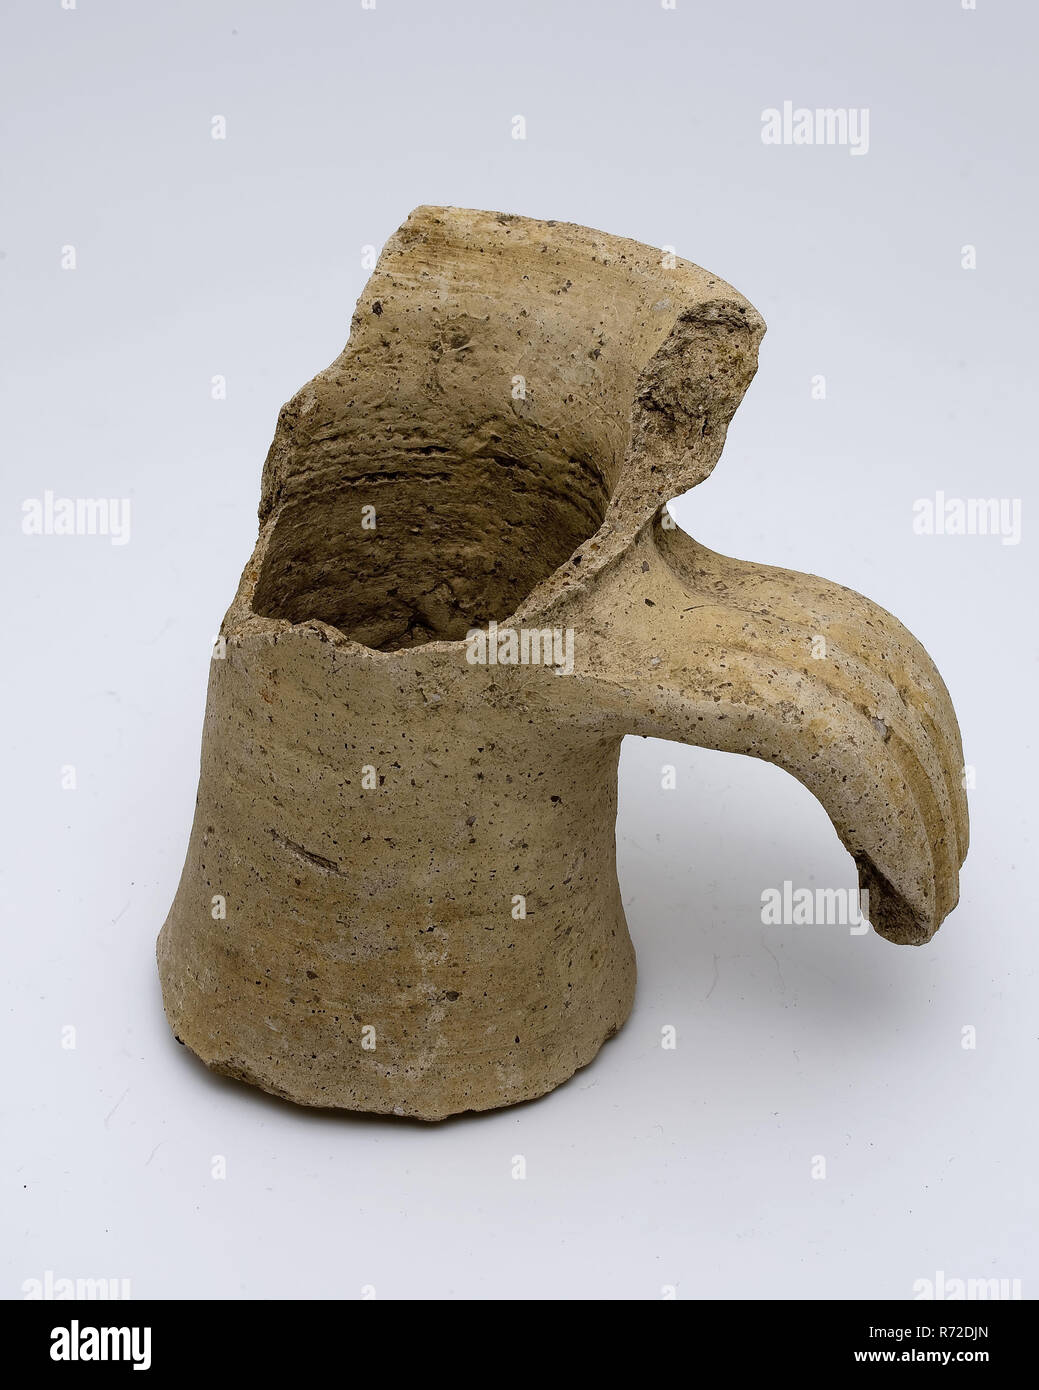 Neck fragment of jug with part of rim and ear, amphora jar holder soil find ceramic pottery, hand-turned baked neck fragment. Roman jug. Yellow-gray pottery. Blasted with gritty material. Profiled ear with three grooves. Neck with cuff collar archeology indigenous pottery import transport store save save Roman Stock Photo